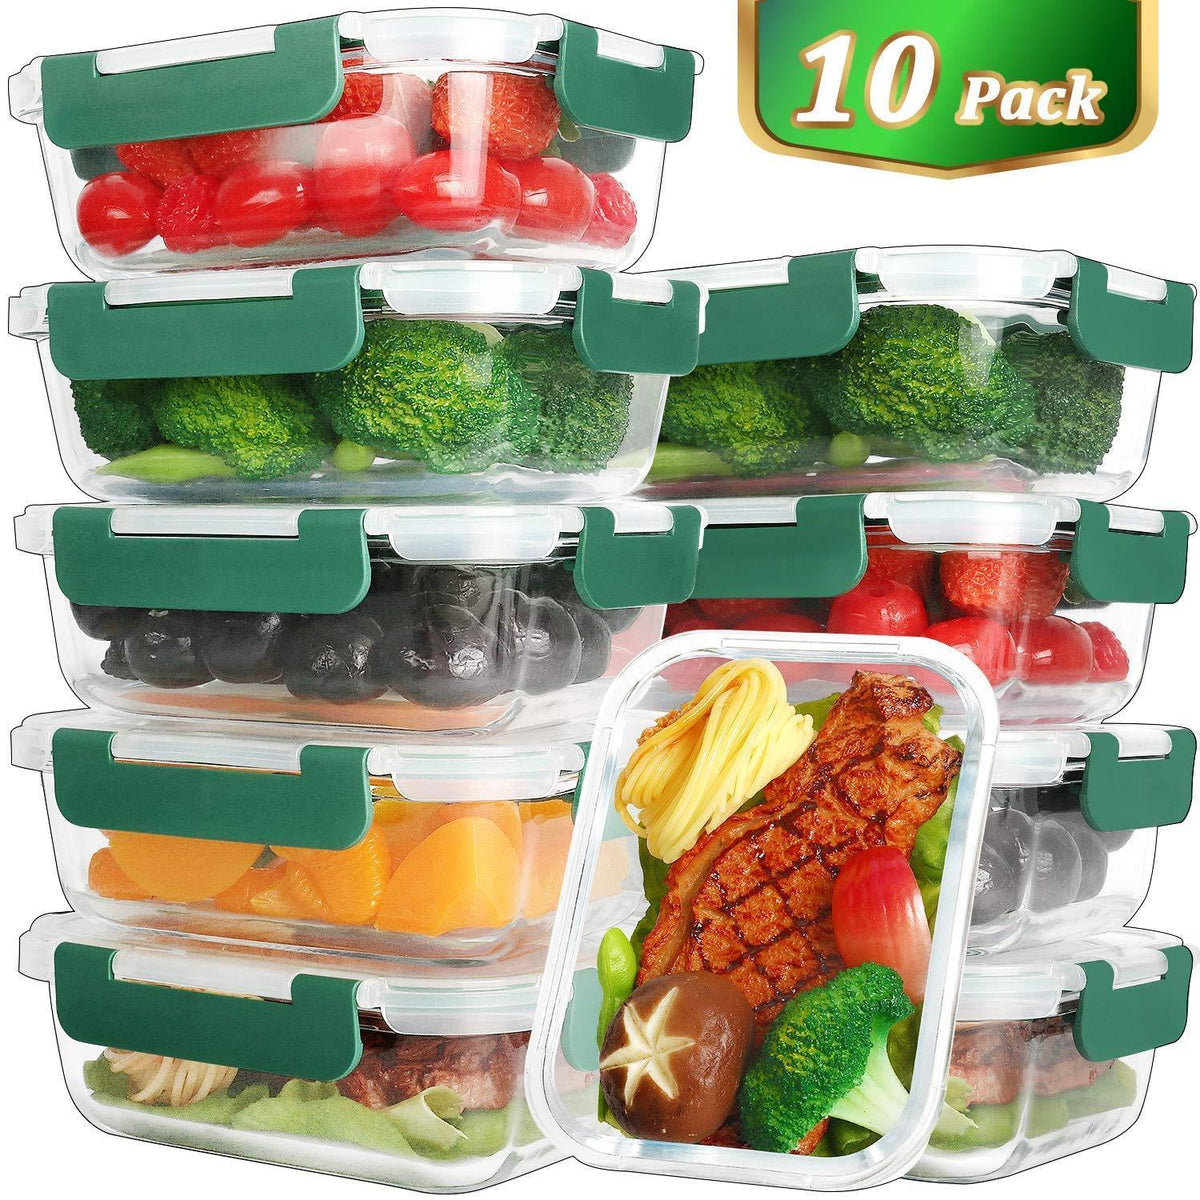 KOMUEE 10 Packs 22 oz Glass Meal Prep Containers, Glass Food Storage  Containers with Lids, Airtight Glass Lunch Containers, BPA Free, Microwave,  Oven, Freezer and Dishwasher Friendly, Green